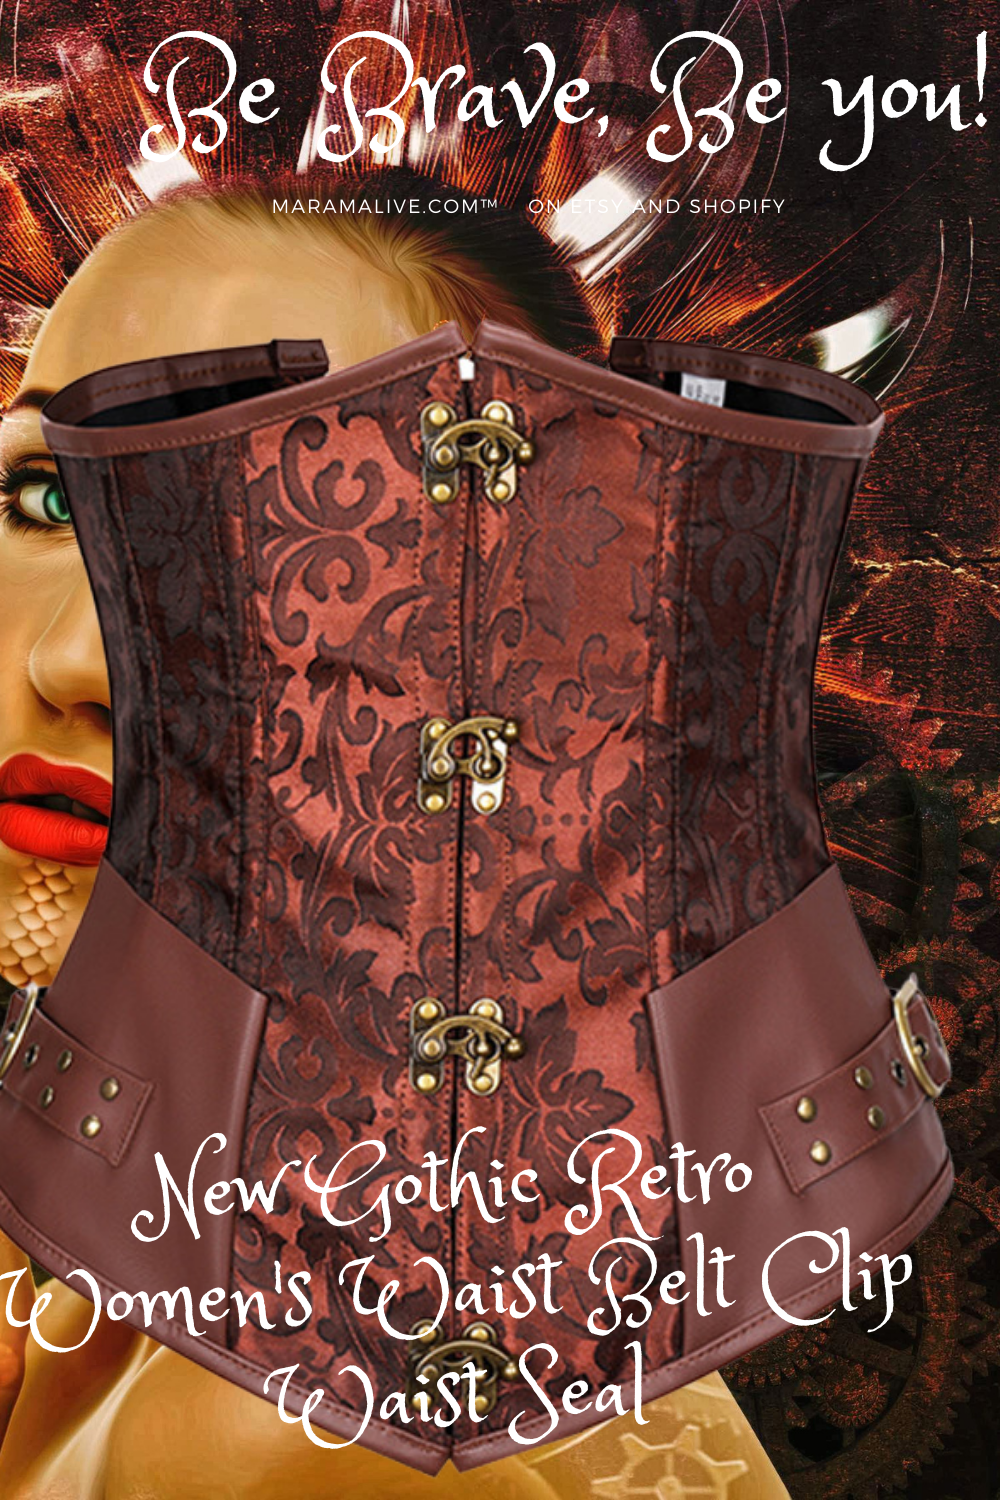 A black New Gothic Retro Women's Waist Belt Clip Waist Seal with metal buckles and straps from Maramalive™.